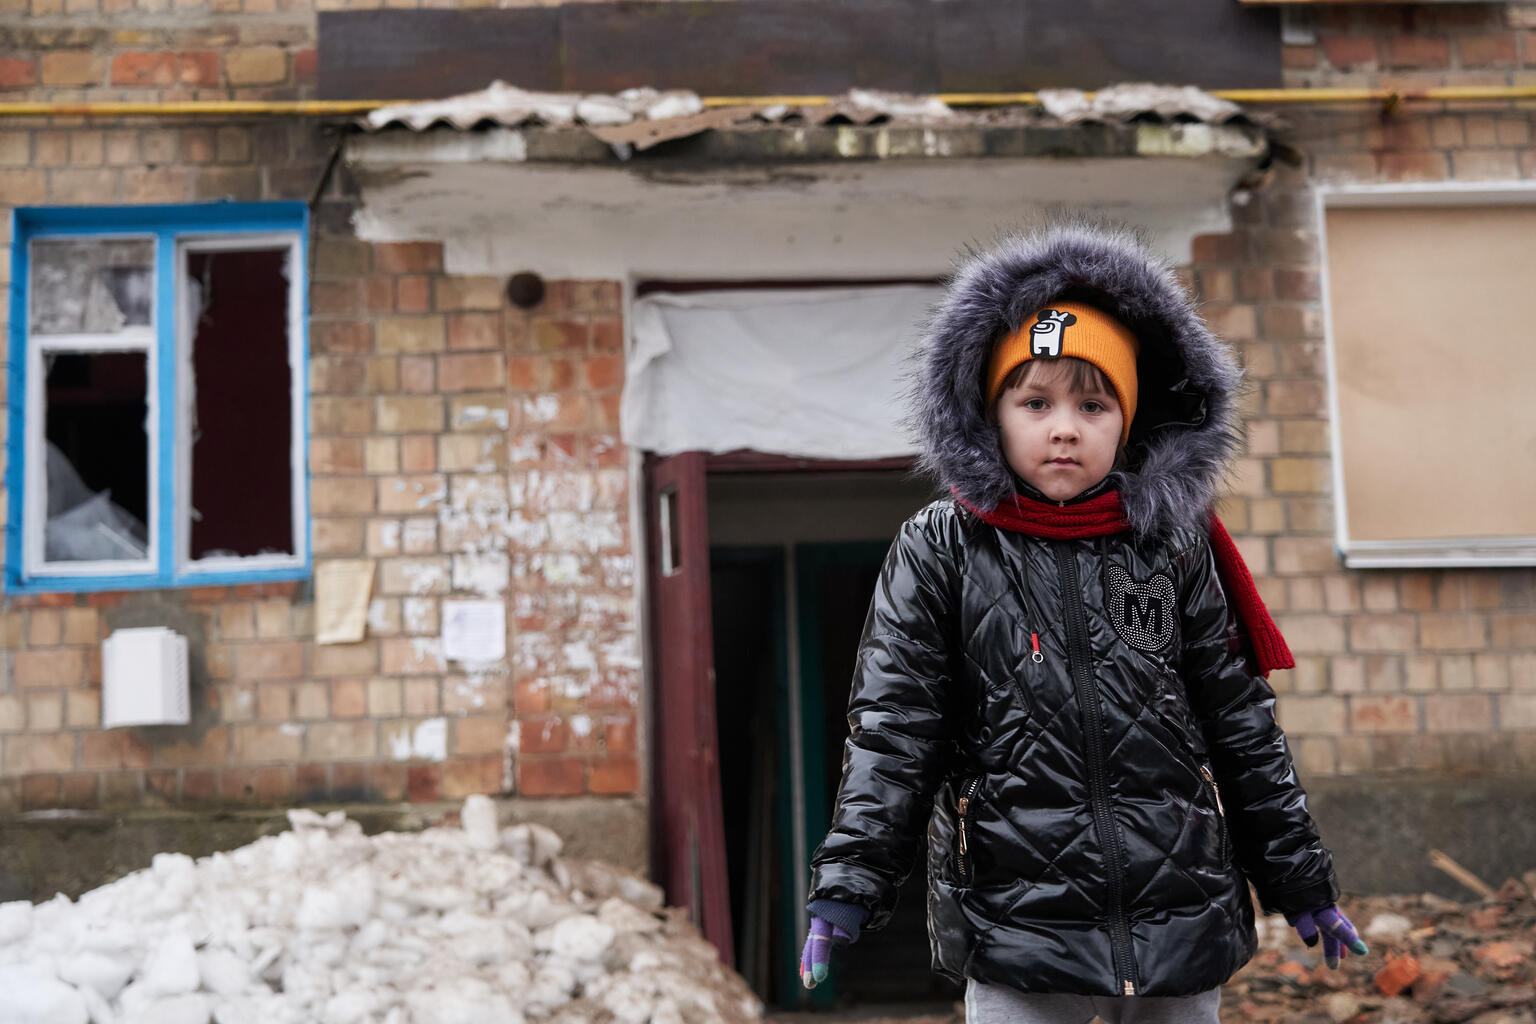 A young girl bundled up in winter clothing standing in front of a dilapidated building.